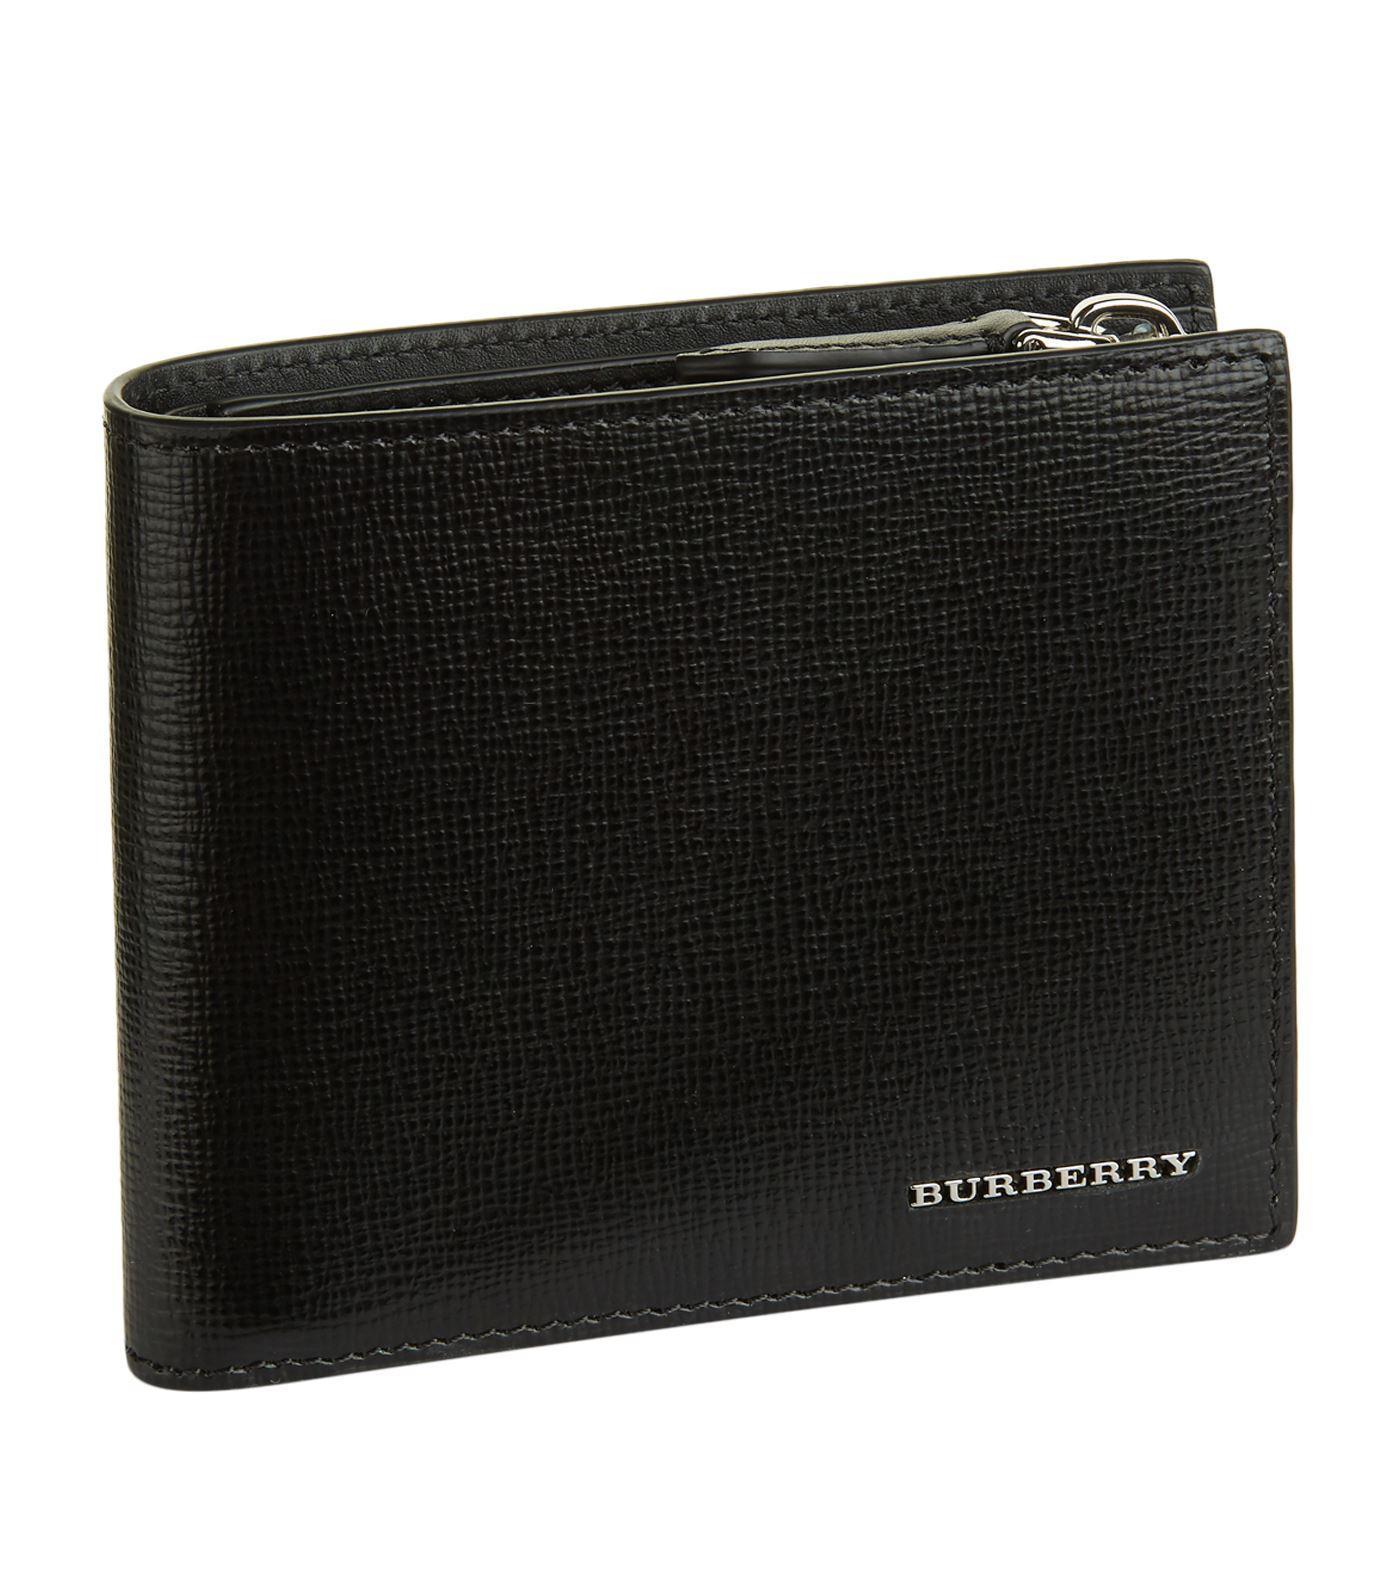 Burberry International London Leather Bifold Wallet in Black for Men - Save 33% | Lyst